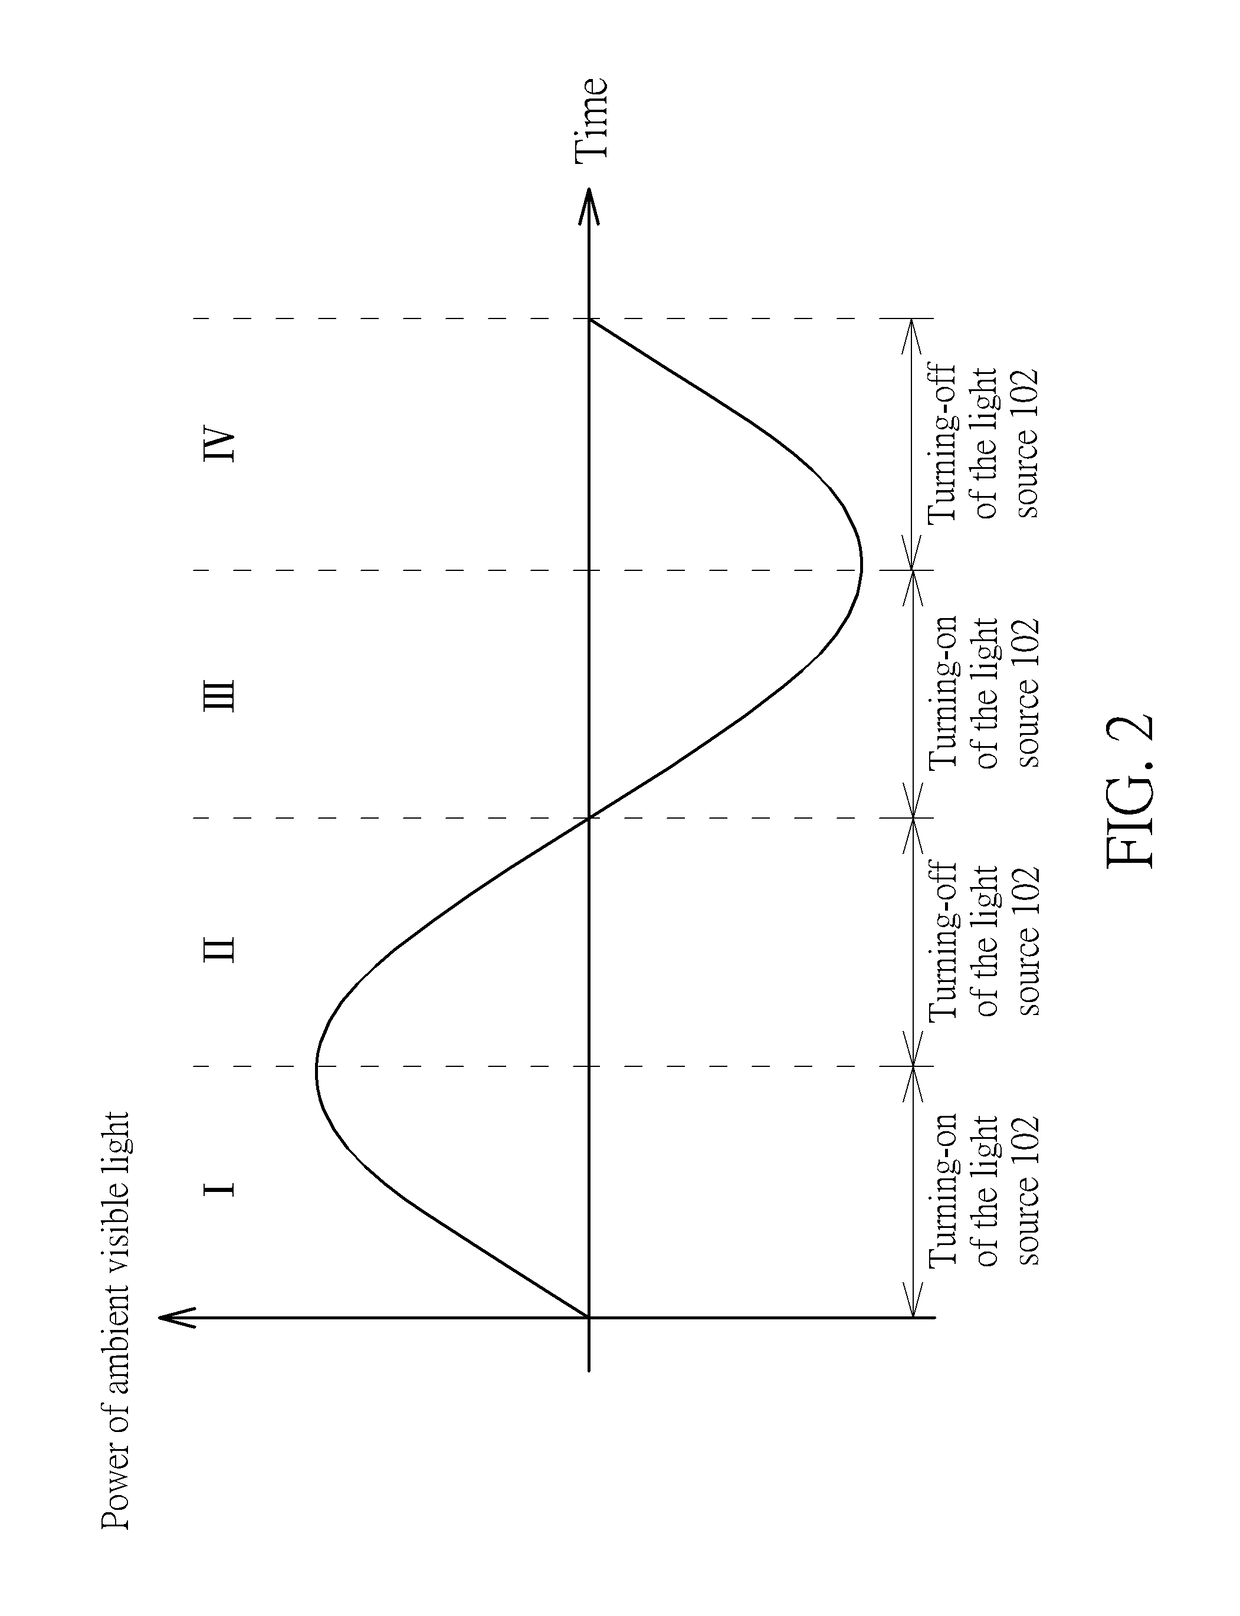 Three-dimensional image sensing device and method of sensing three-dimensional images